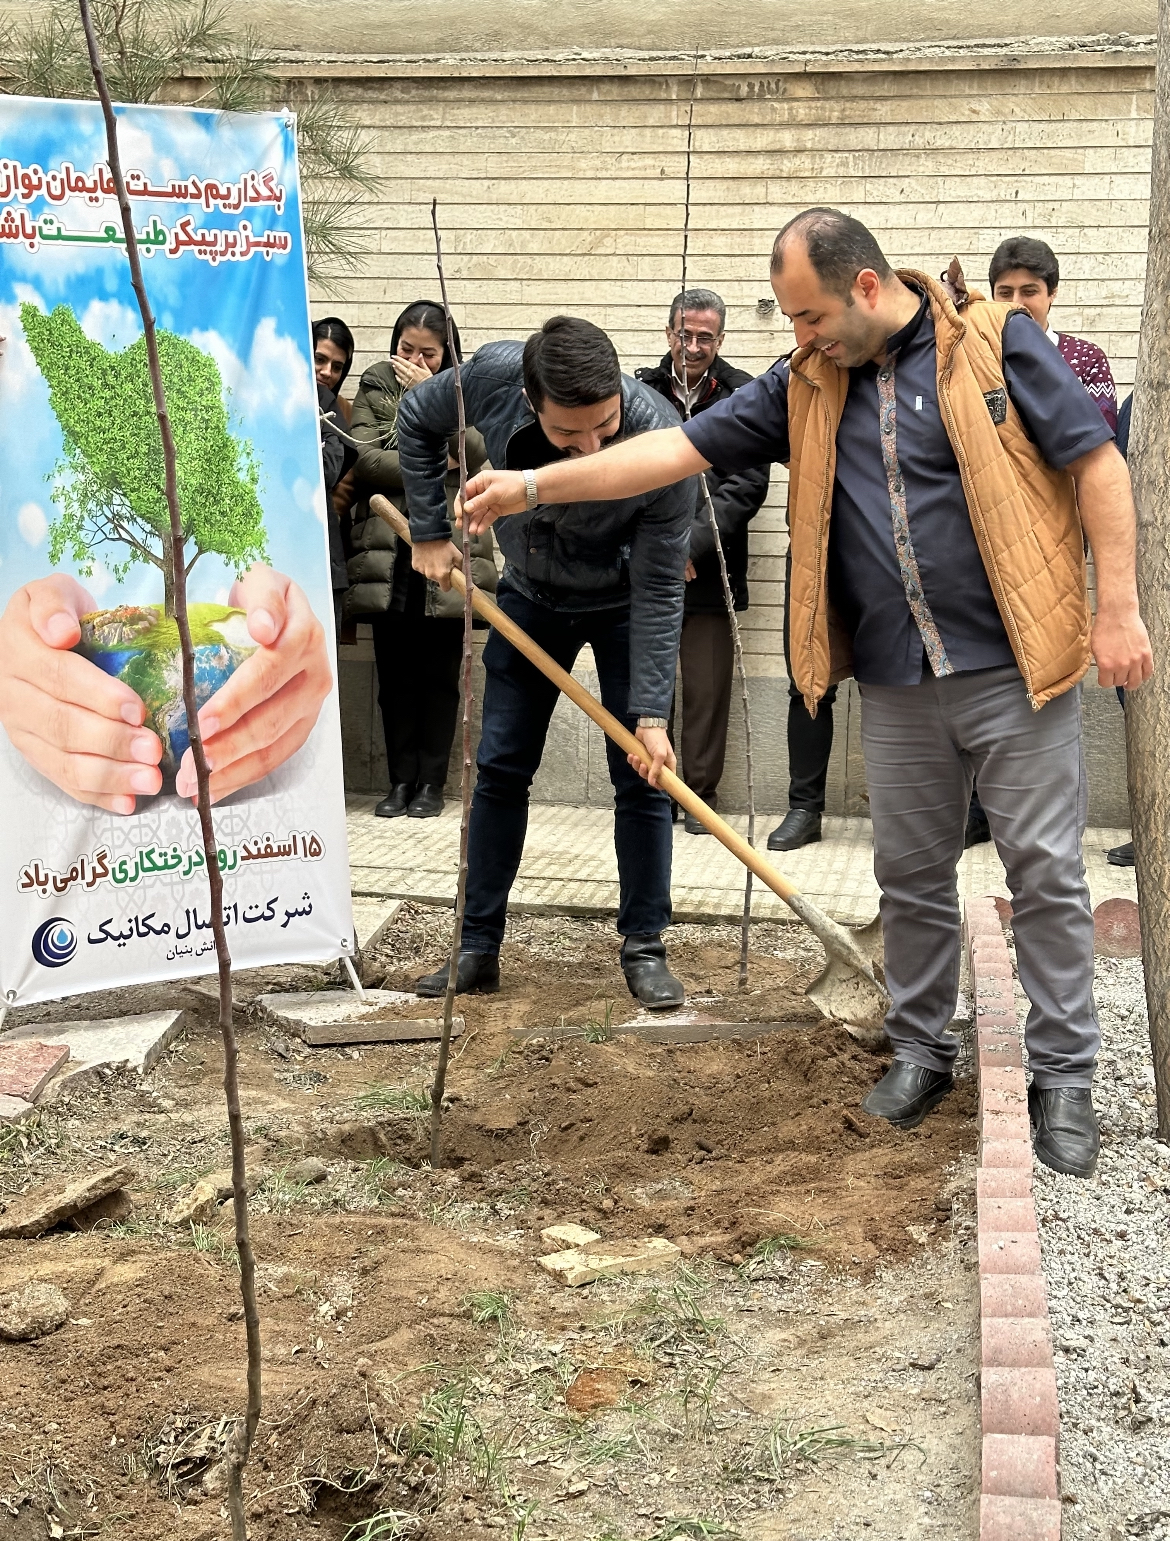 The tree planting ceremony at the Ettesal Mechanic Company aligns with the annual Tree Planting Day, which takes place on March 5th